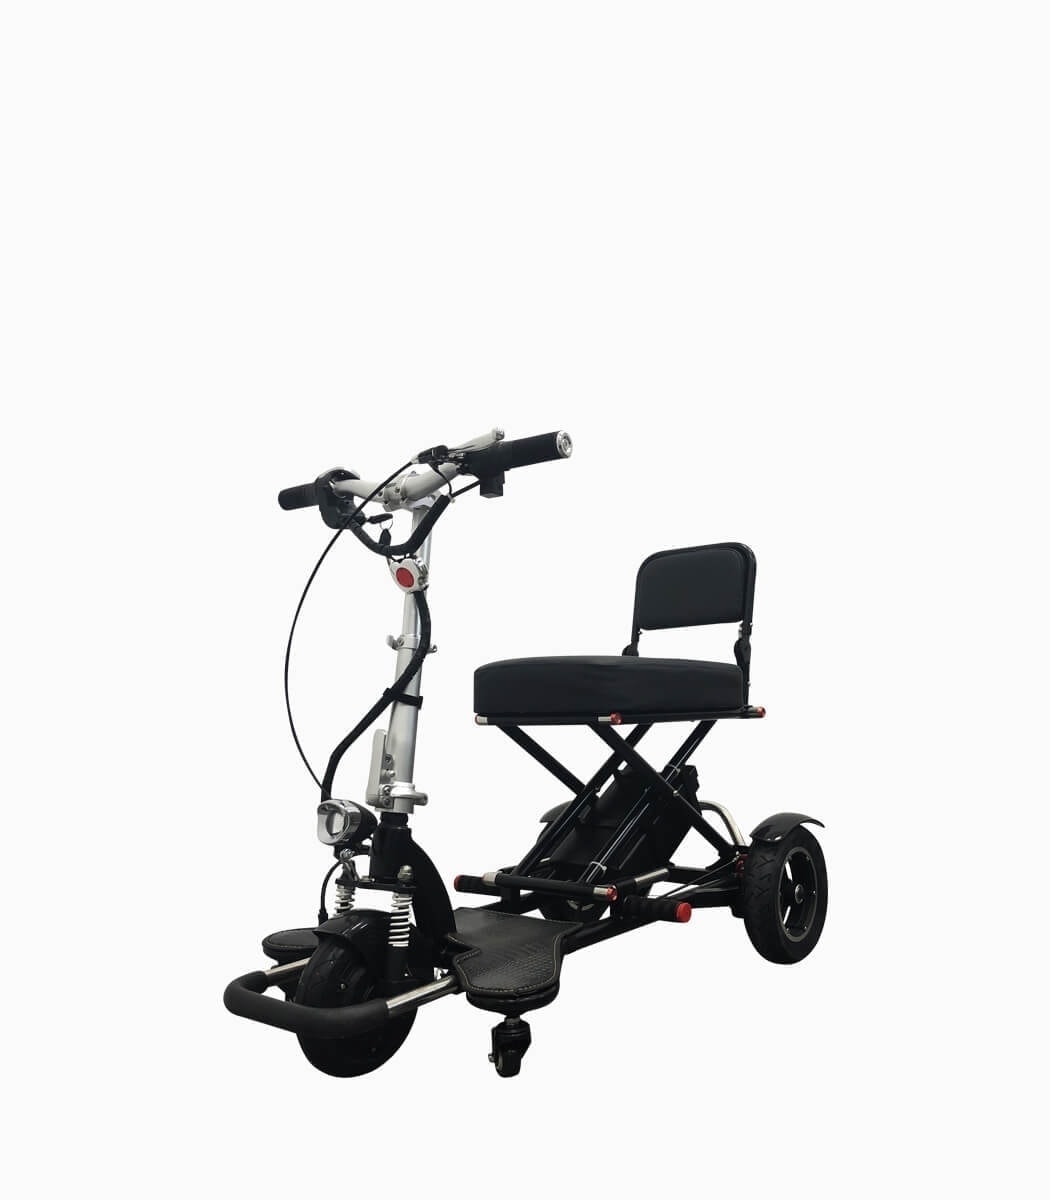 MOBOT FLEXI MAX (BLACK12AH) 3 wheel mobility scooter angled left